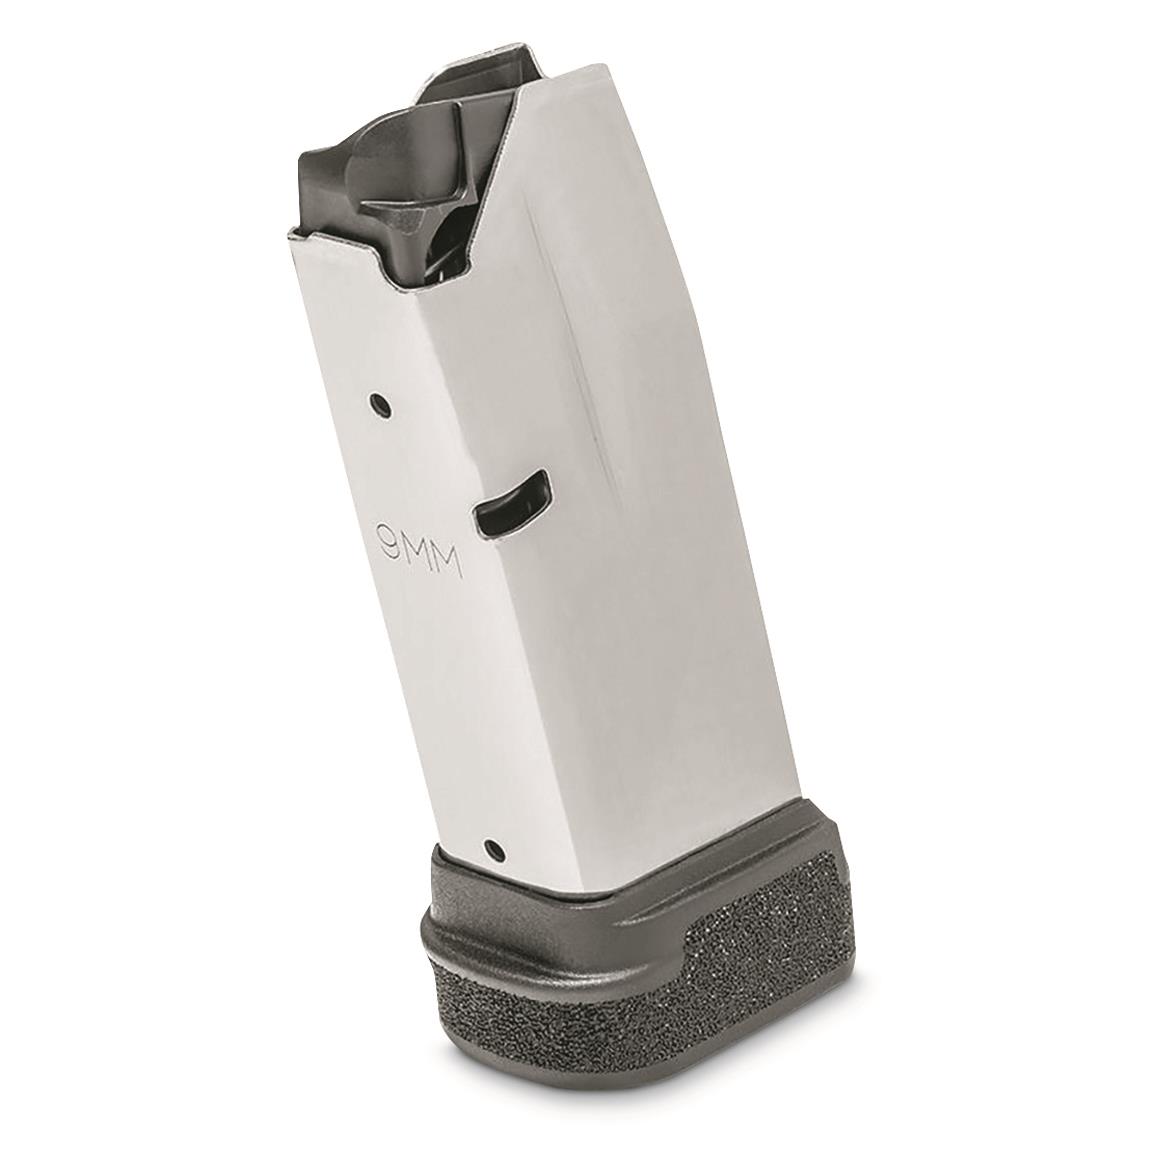 Springfield Hellcat Extended Magazine, 9mm, 13 Rounds